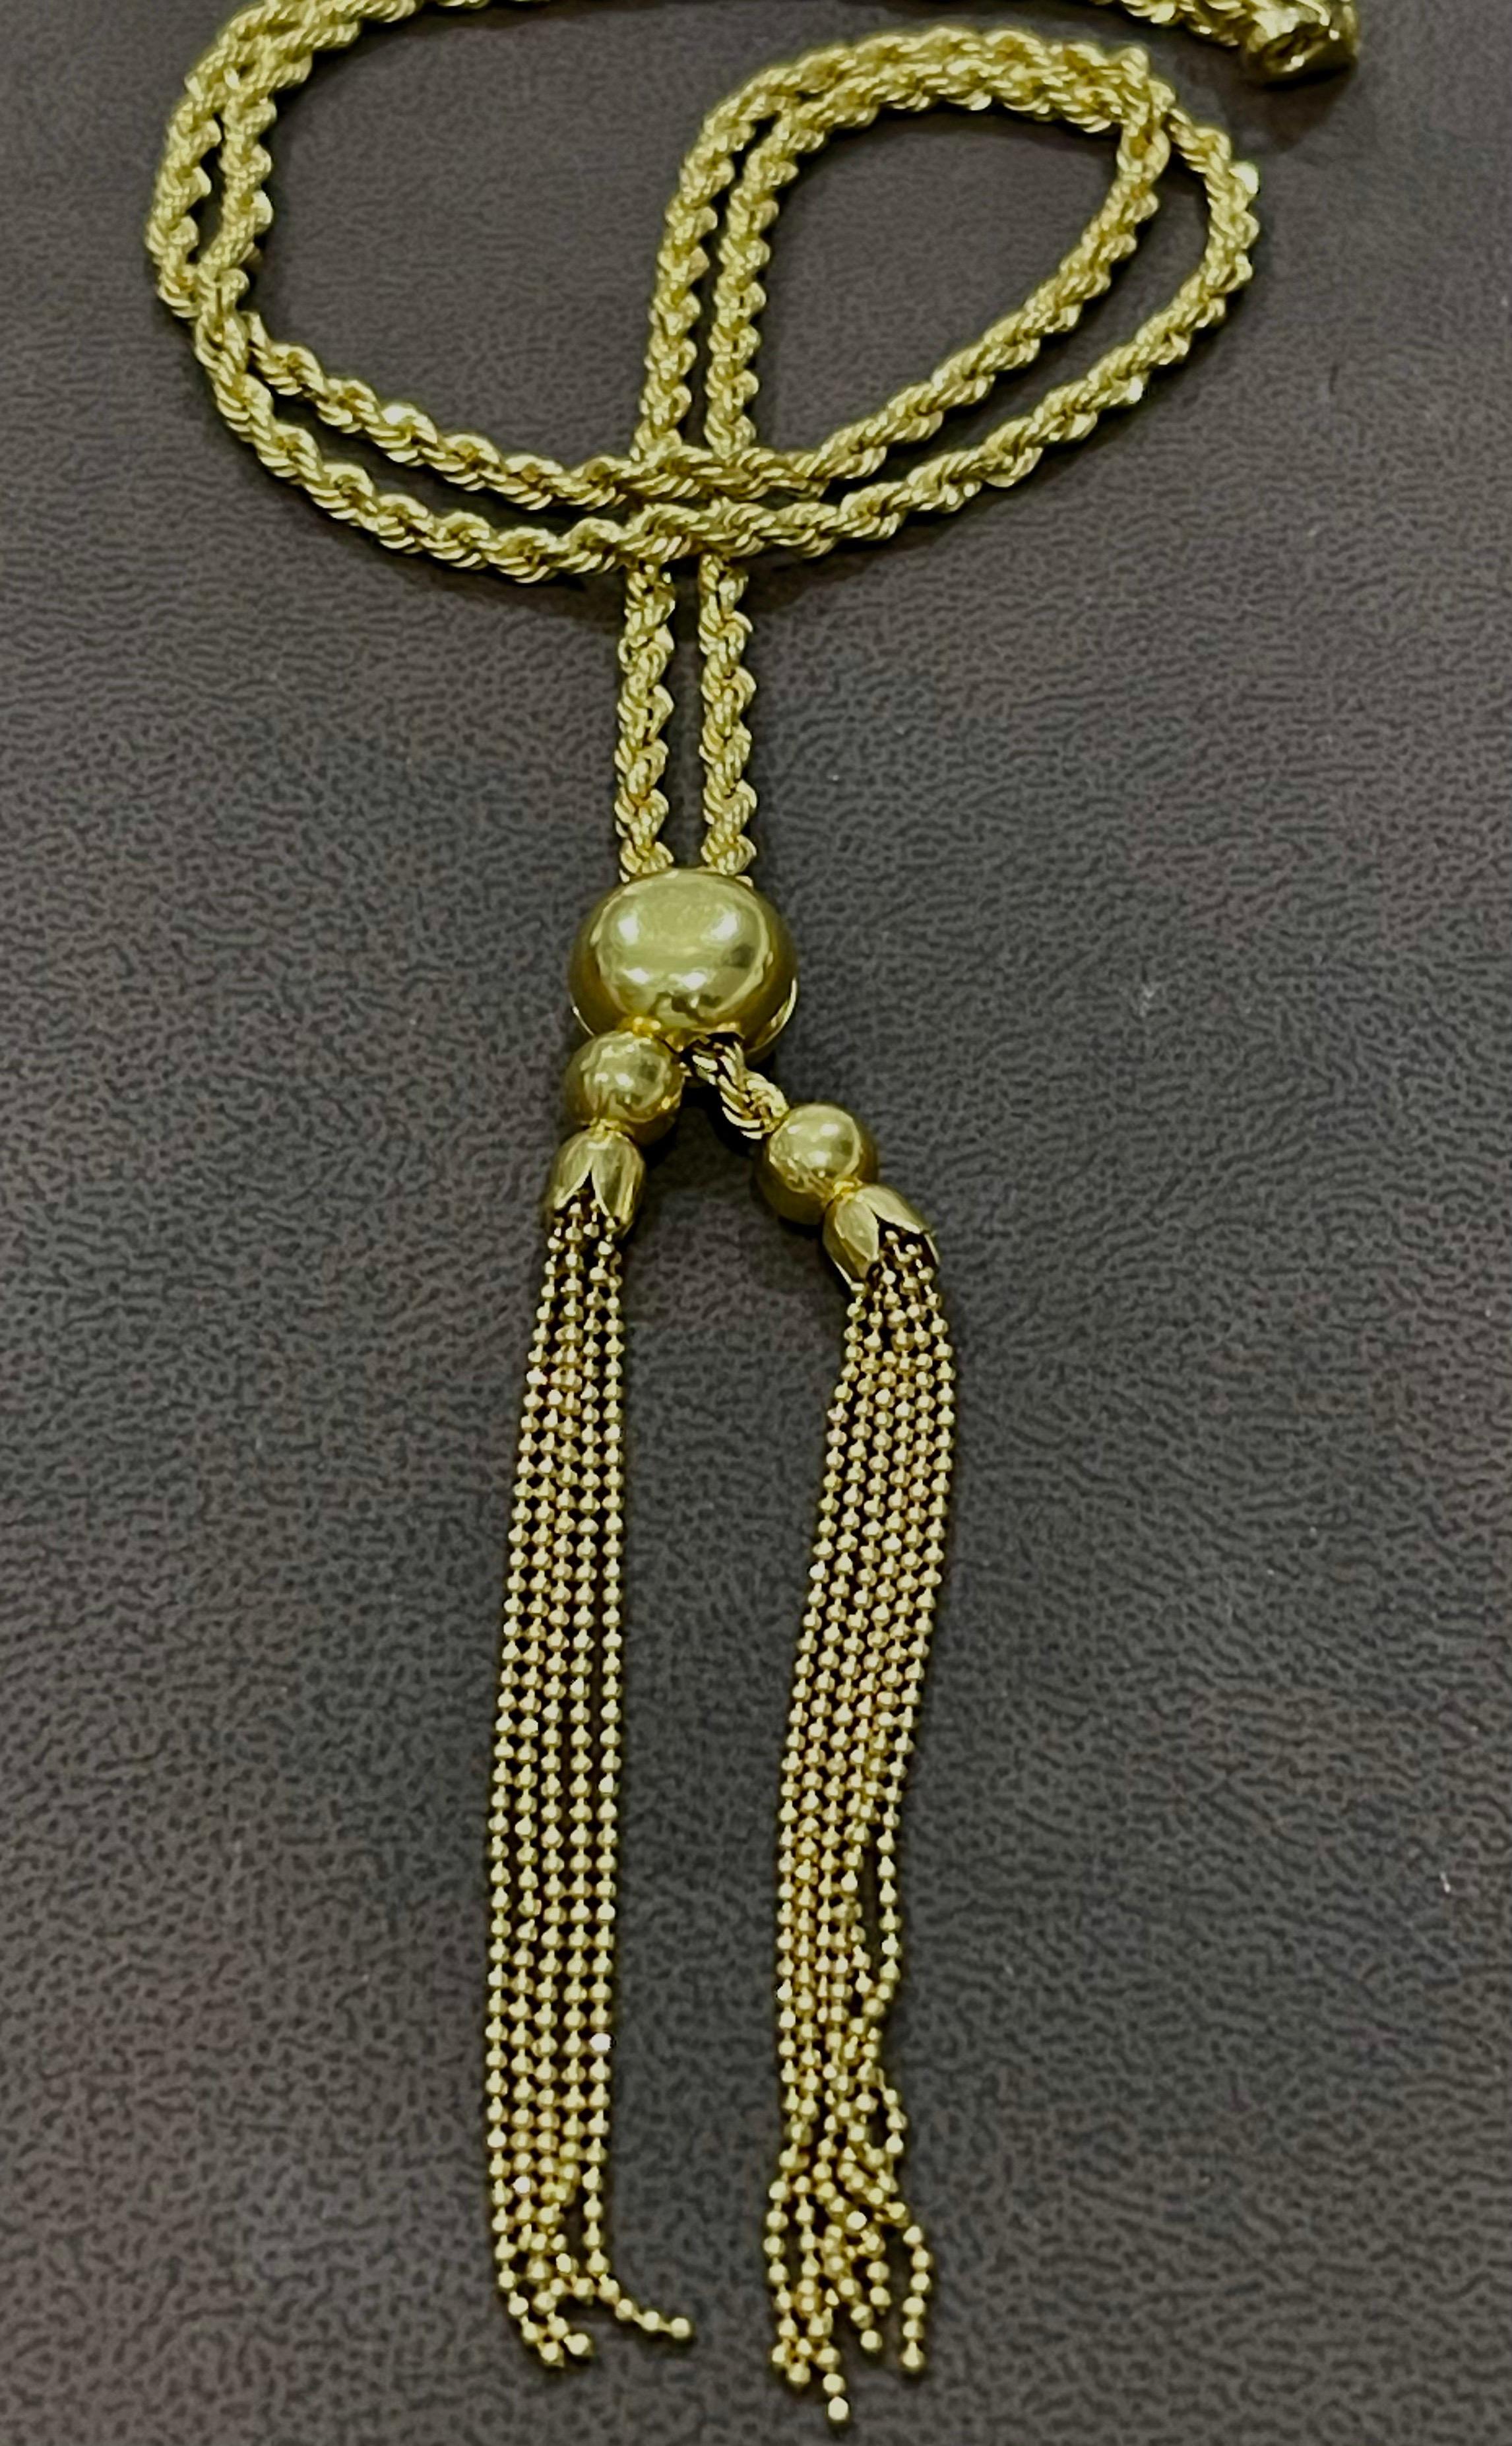 Women's or Men's Vintage 18k Gold 18.7 Gm Rope Chain Adjustable Sliding Chain with Ball